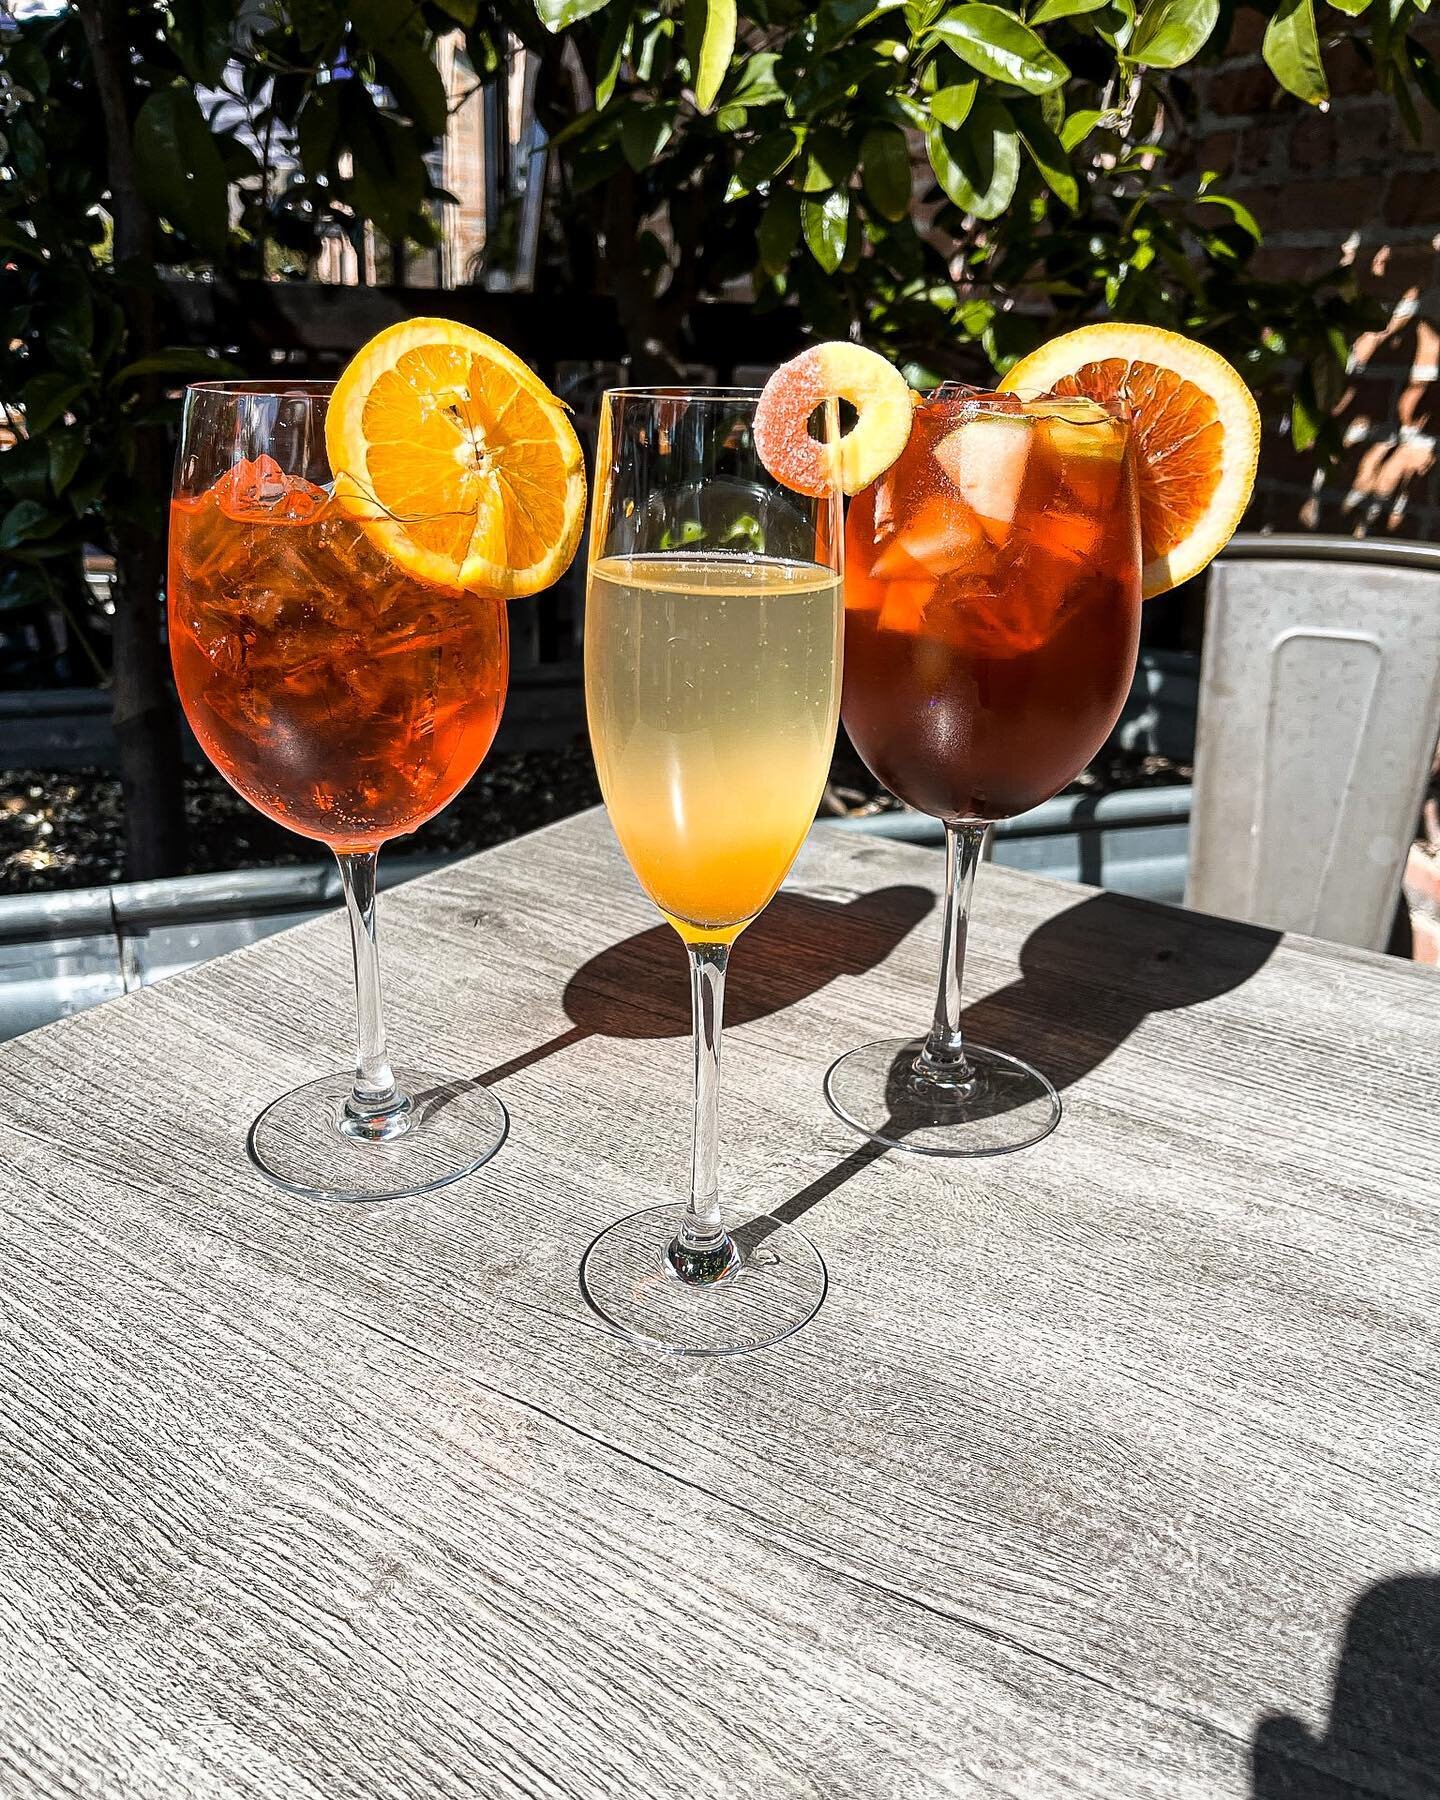 Happy Mothers Day!!🌻💐🌷
Celebrate with us with these Drinks Specials!!!🍾🍷
Aperol Spritz, Blood Orange Sangria &amp; Peach Bellini😁😁